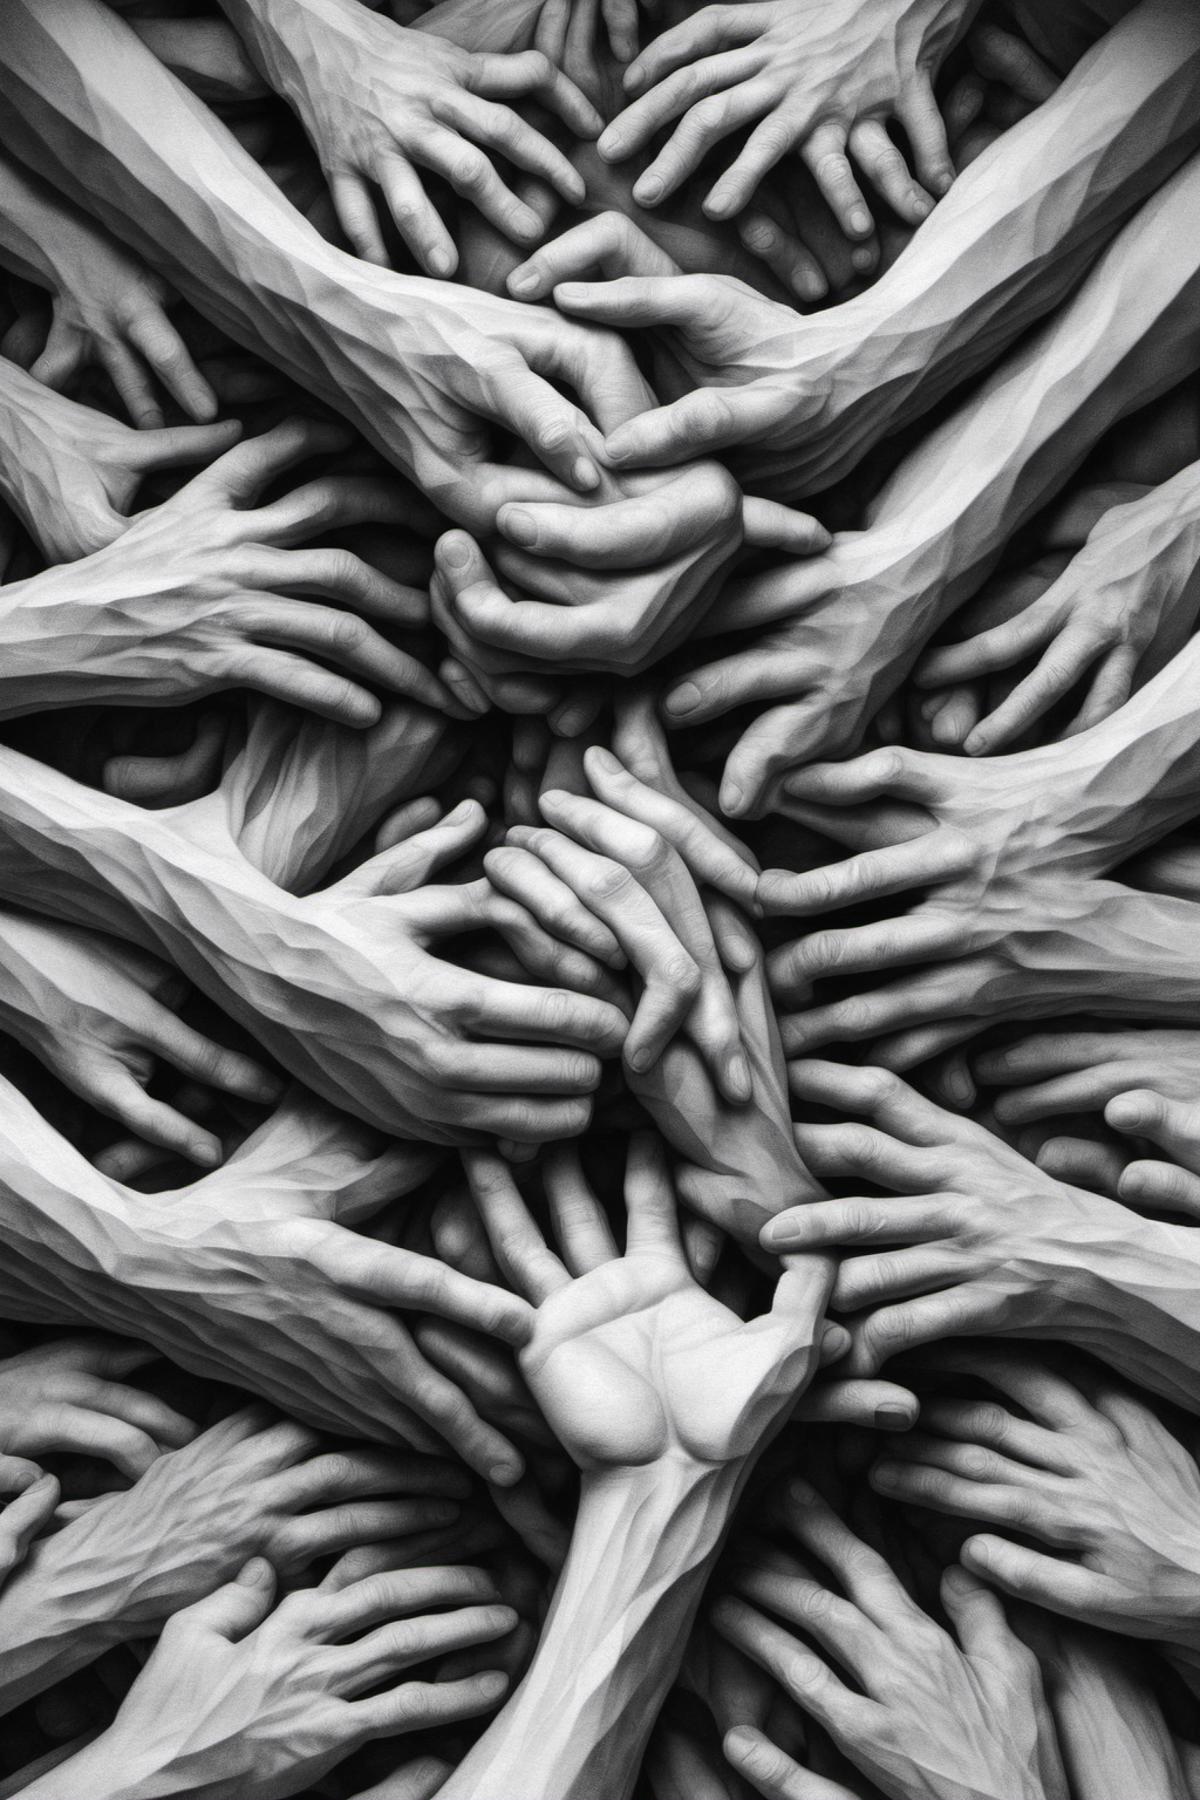 A group of hands, some of which are holding hands with other hands, forming a large circle.